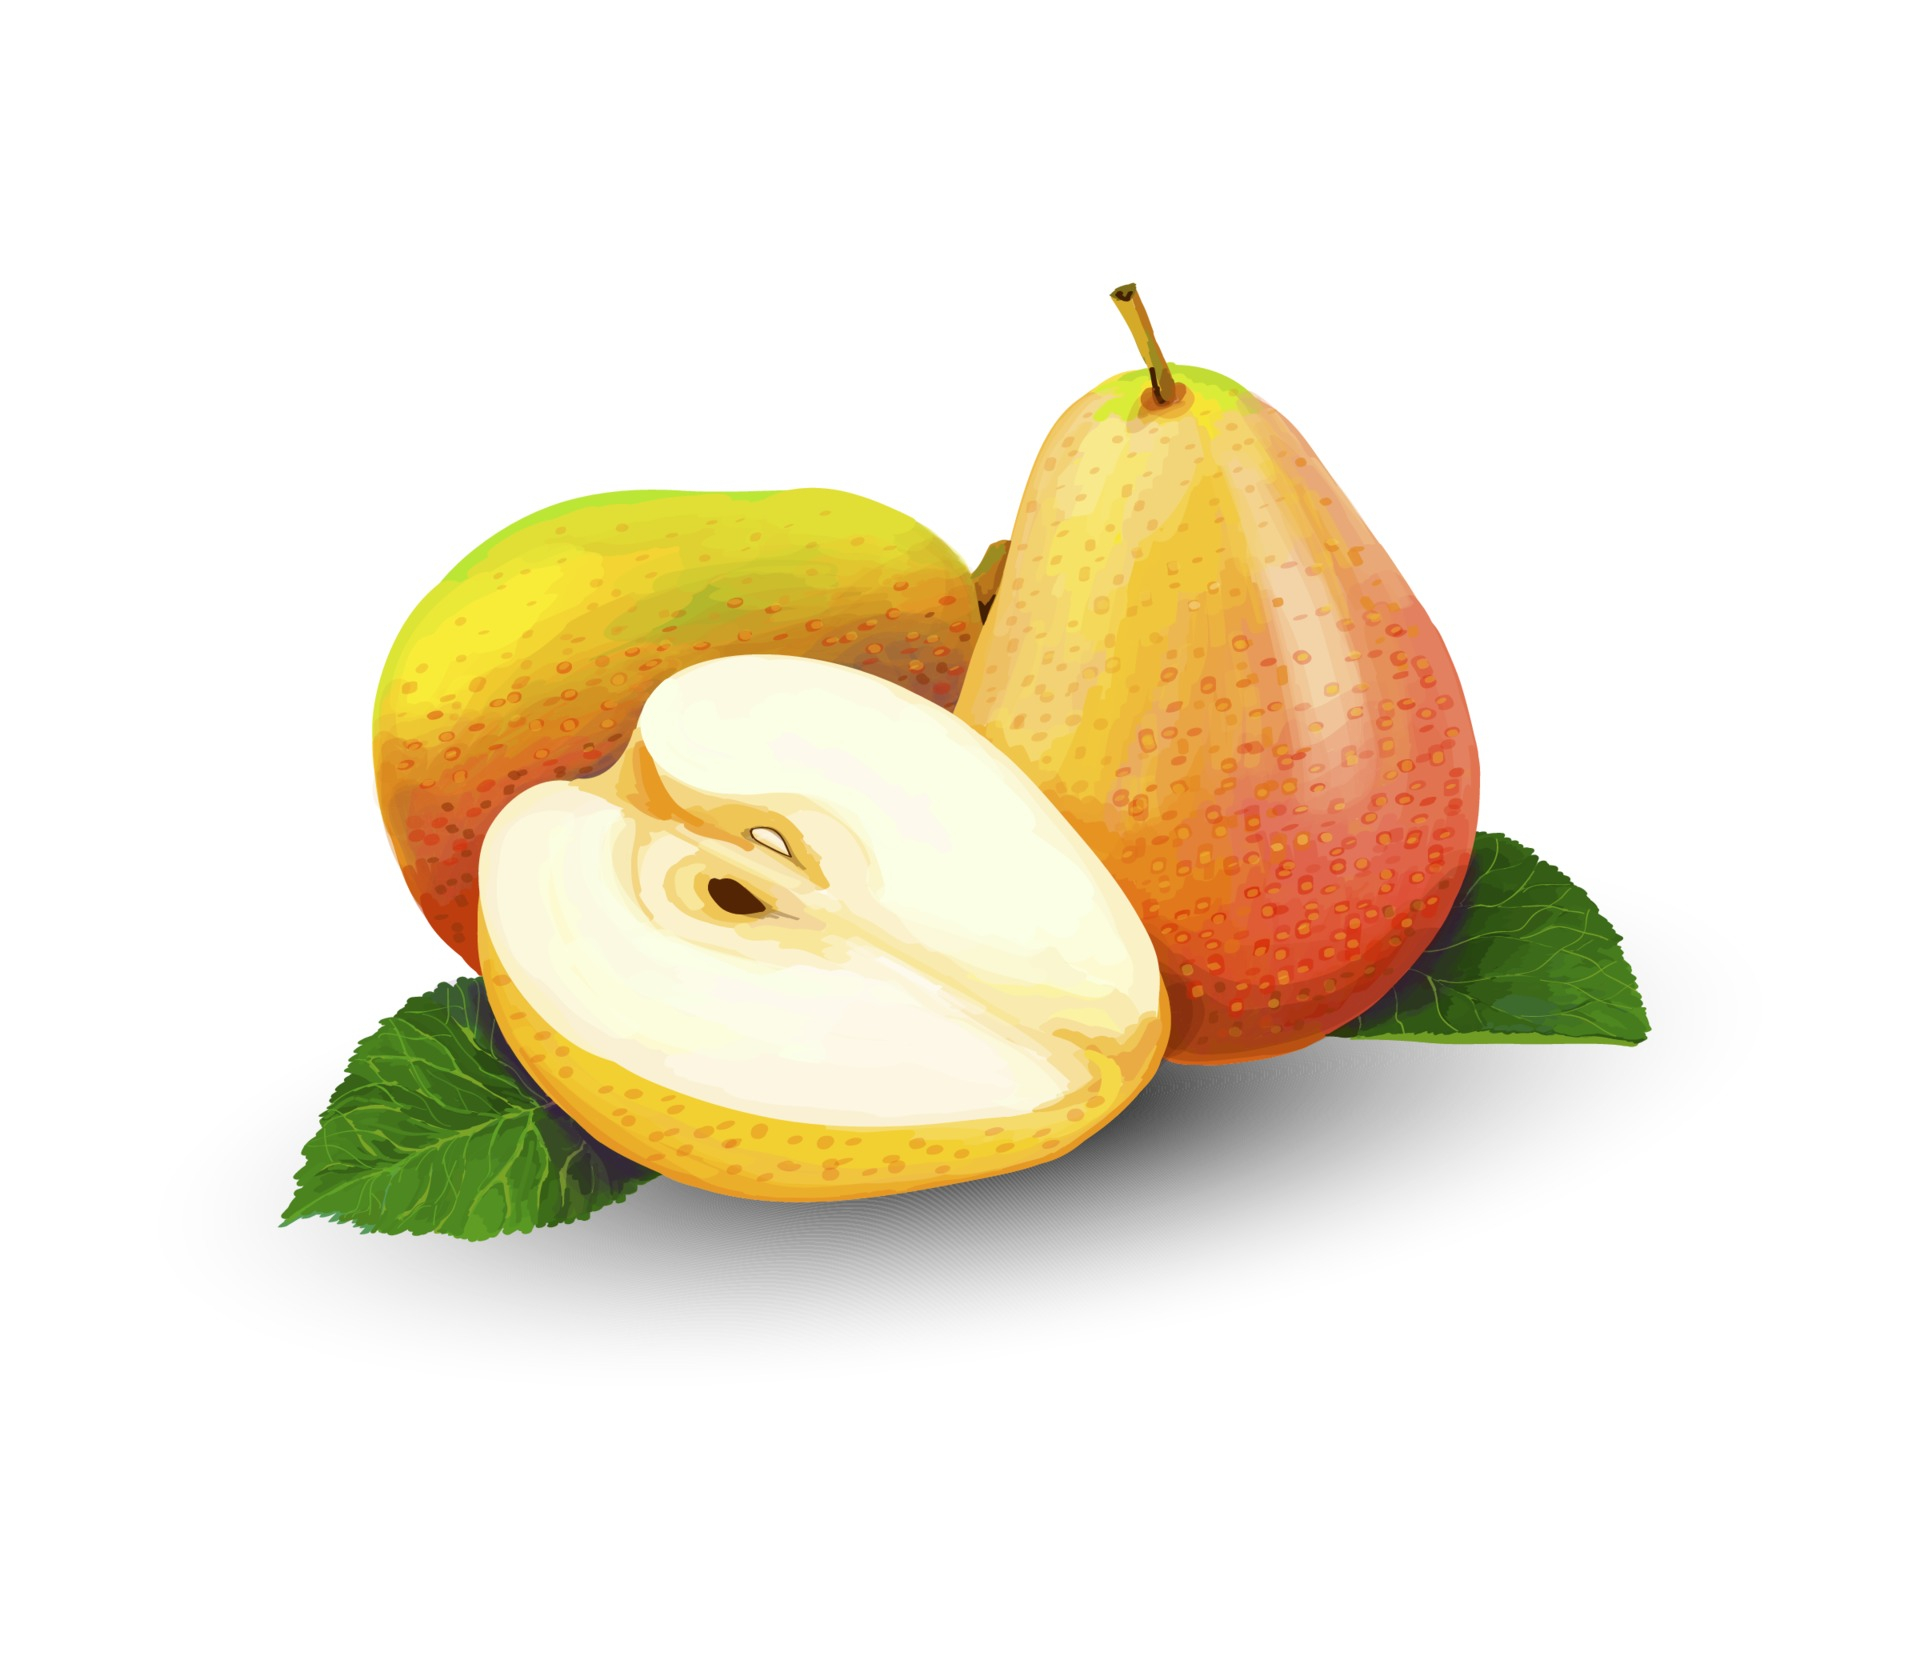 1920x1680 Pear whole and slices sweet fruit on a white background Vector realistic illustration 2492419 Vector Art